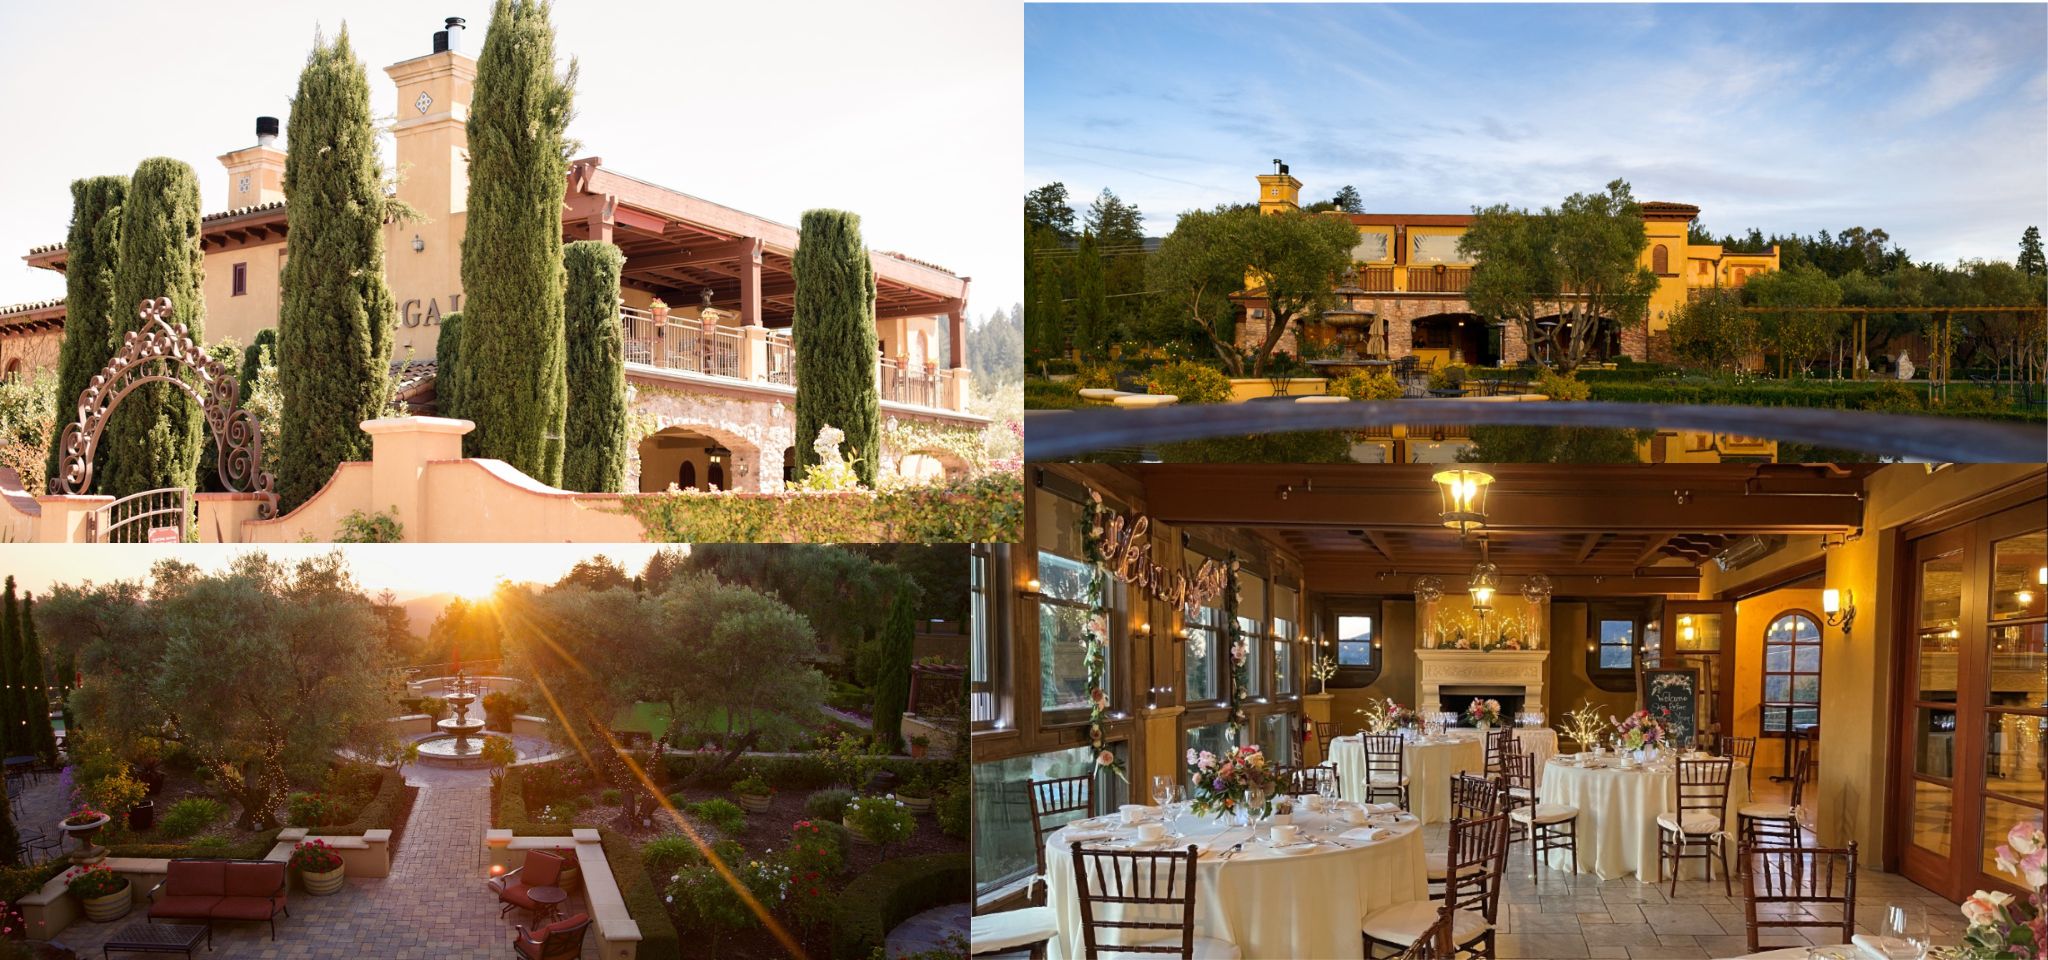 a collage of indoor and outdoor images of Regale Winery